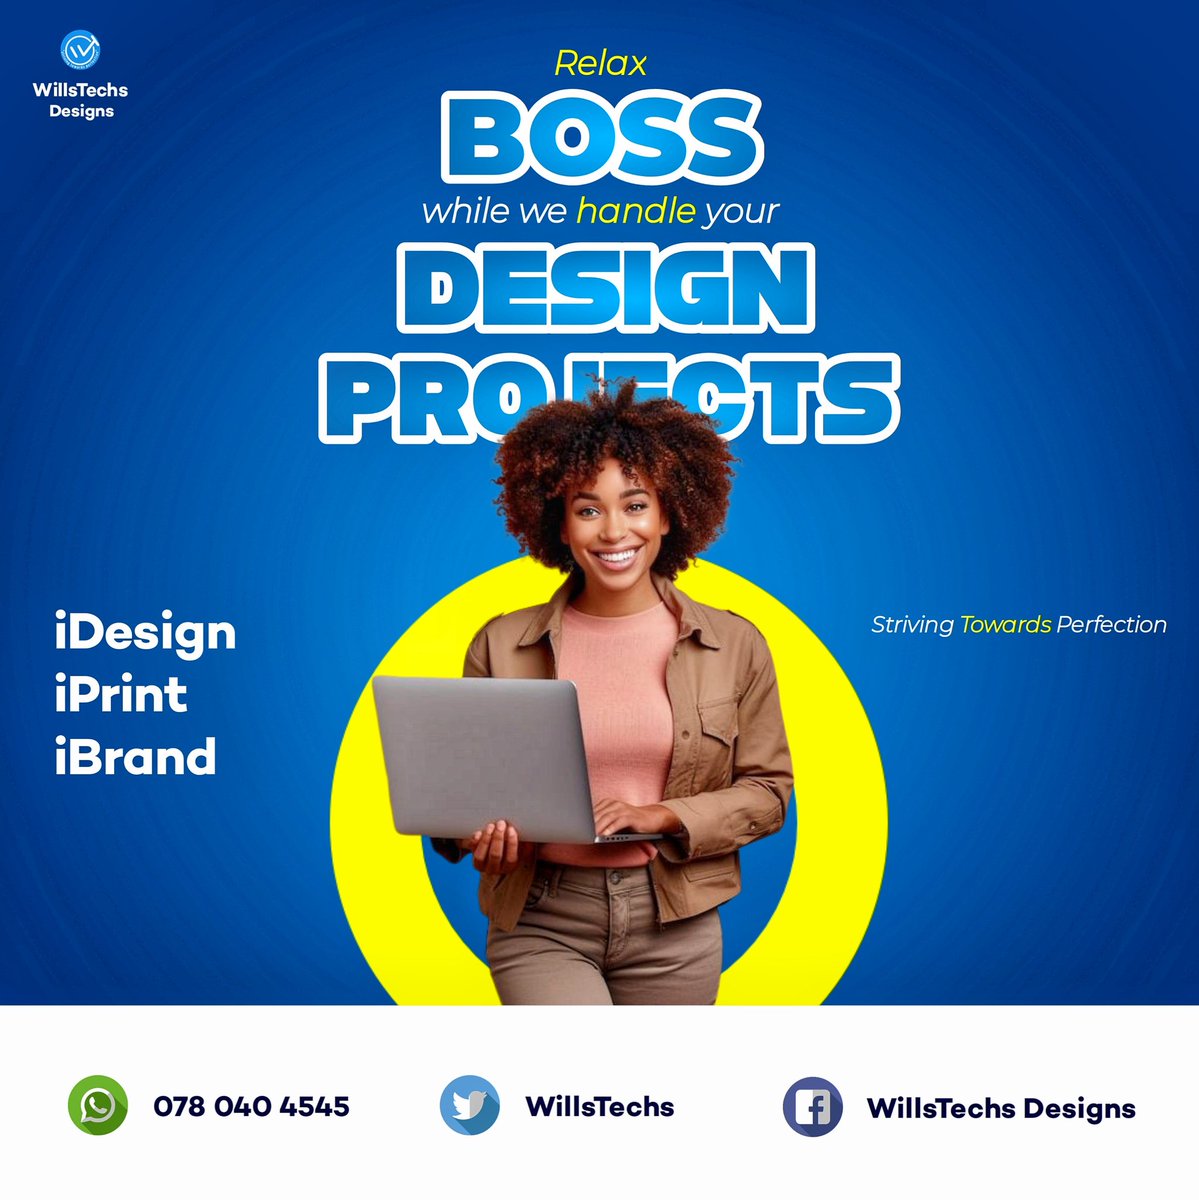 Boss just relax while we take care of business 😁
iDESIGN | iPRINT | iBRAND 
#StrivingTowardsPerfection